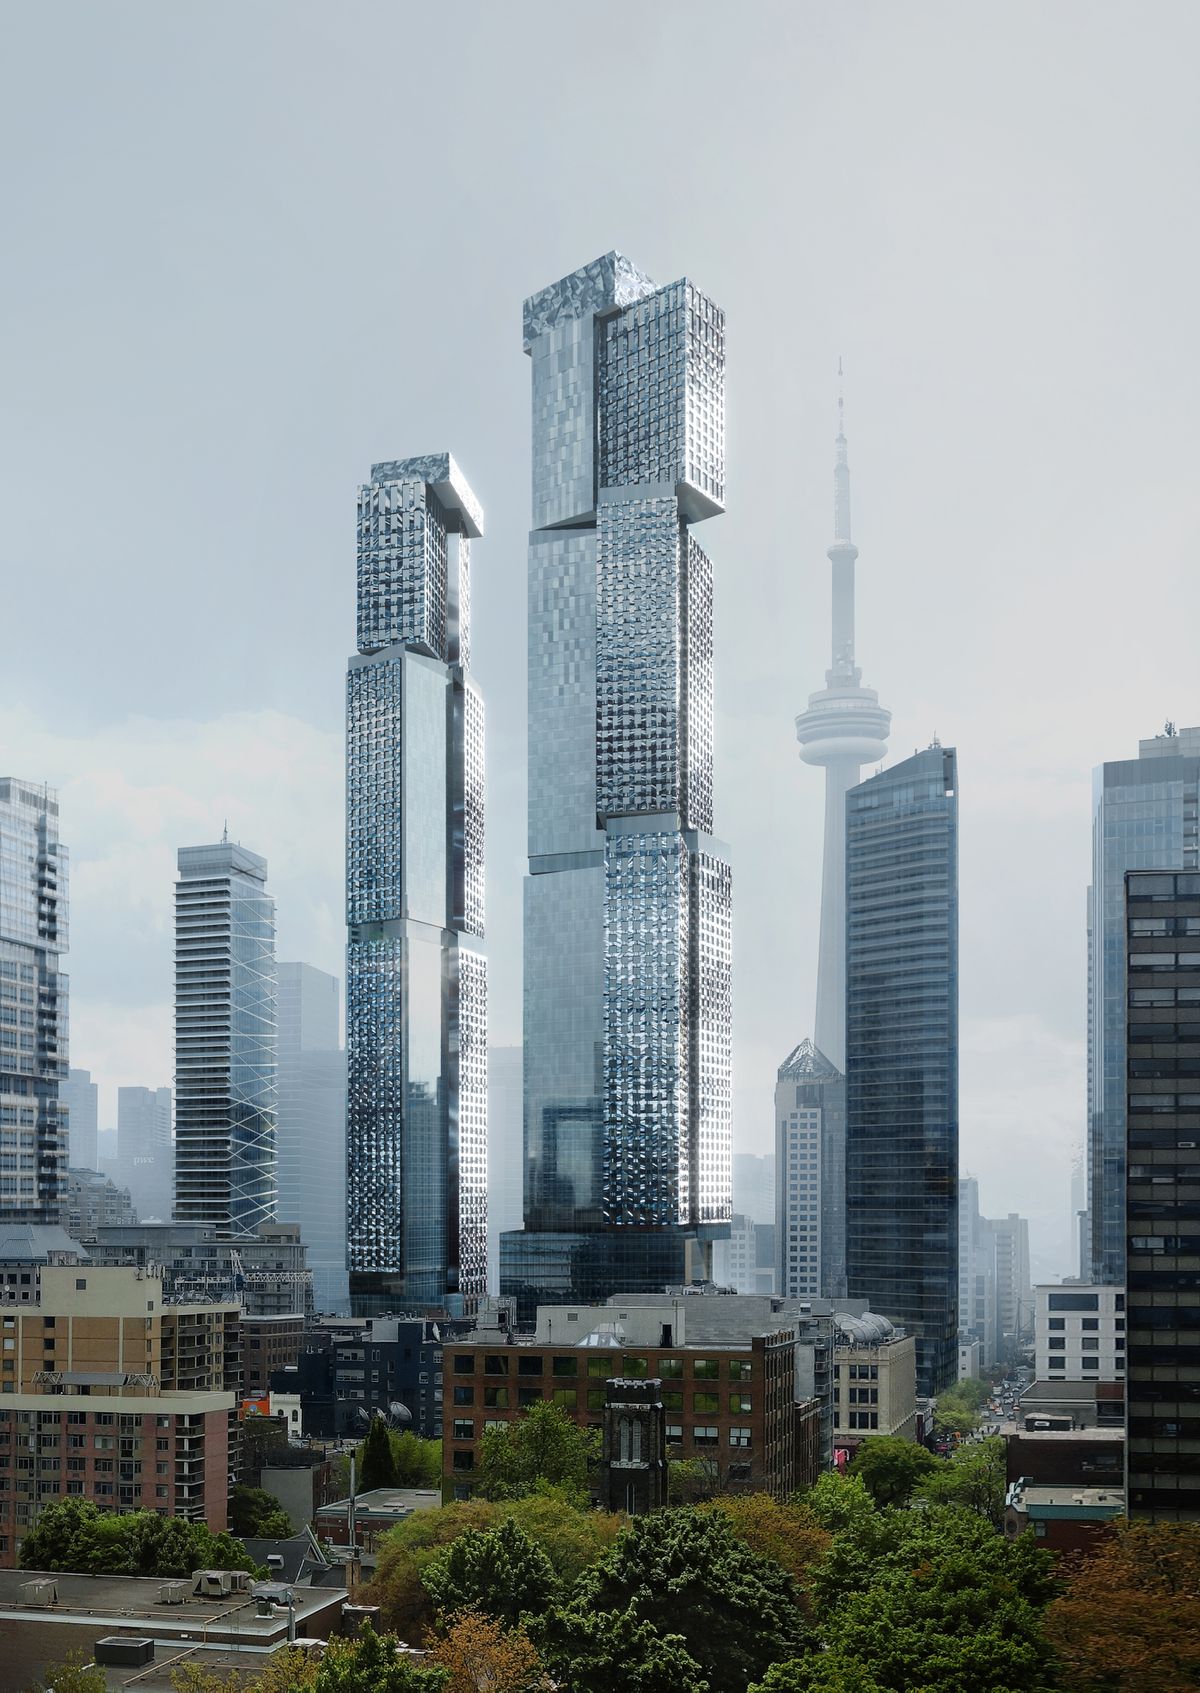 Gehry Towers, designed by Gehry Partners for Great Gulf, Dream, and Westdale Properties